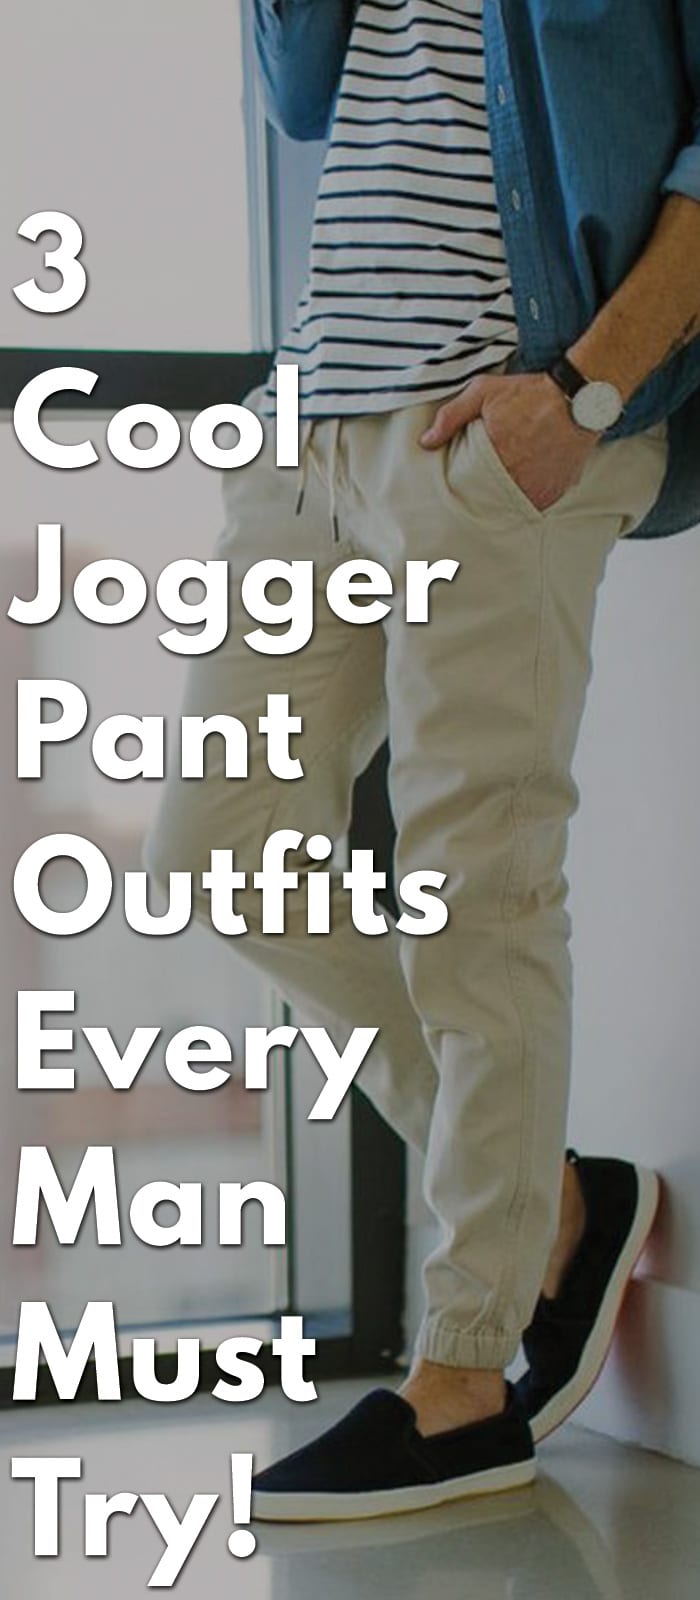 3 Cool Jogger Pant Outfits Every Man Must Try!